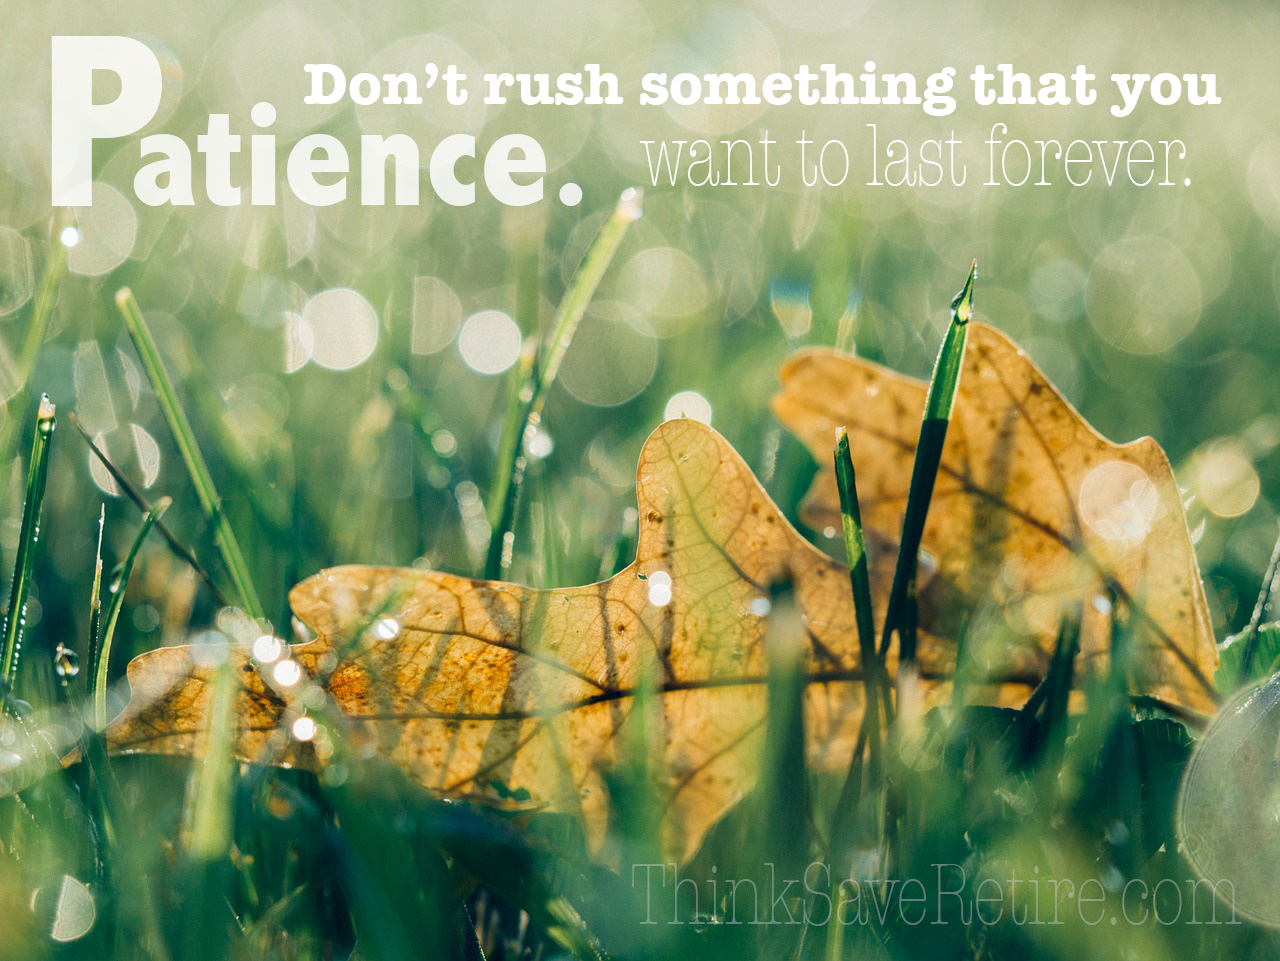 Patience. Don't rush something that you want to last forever.